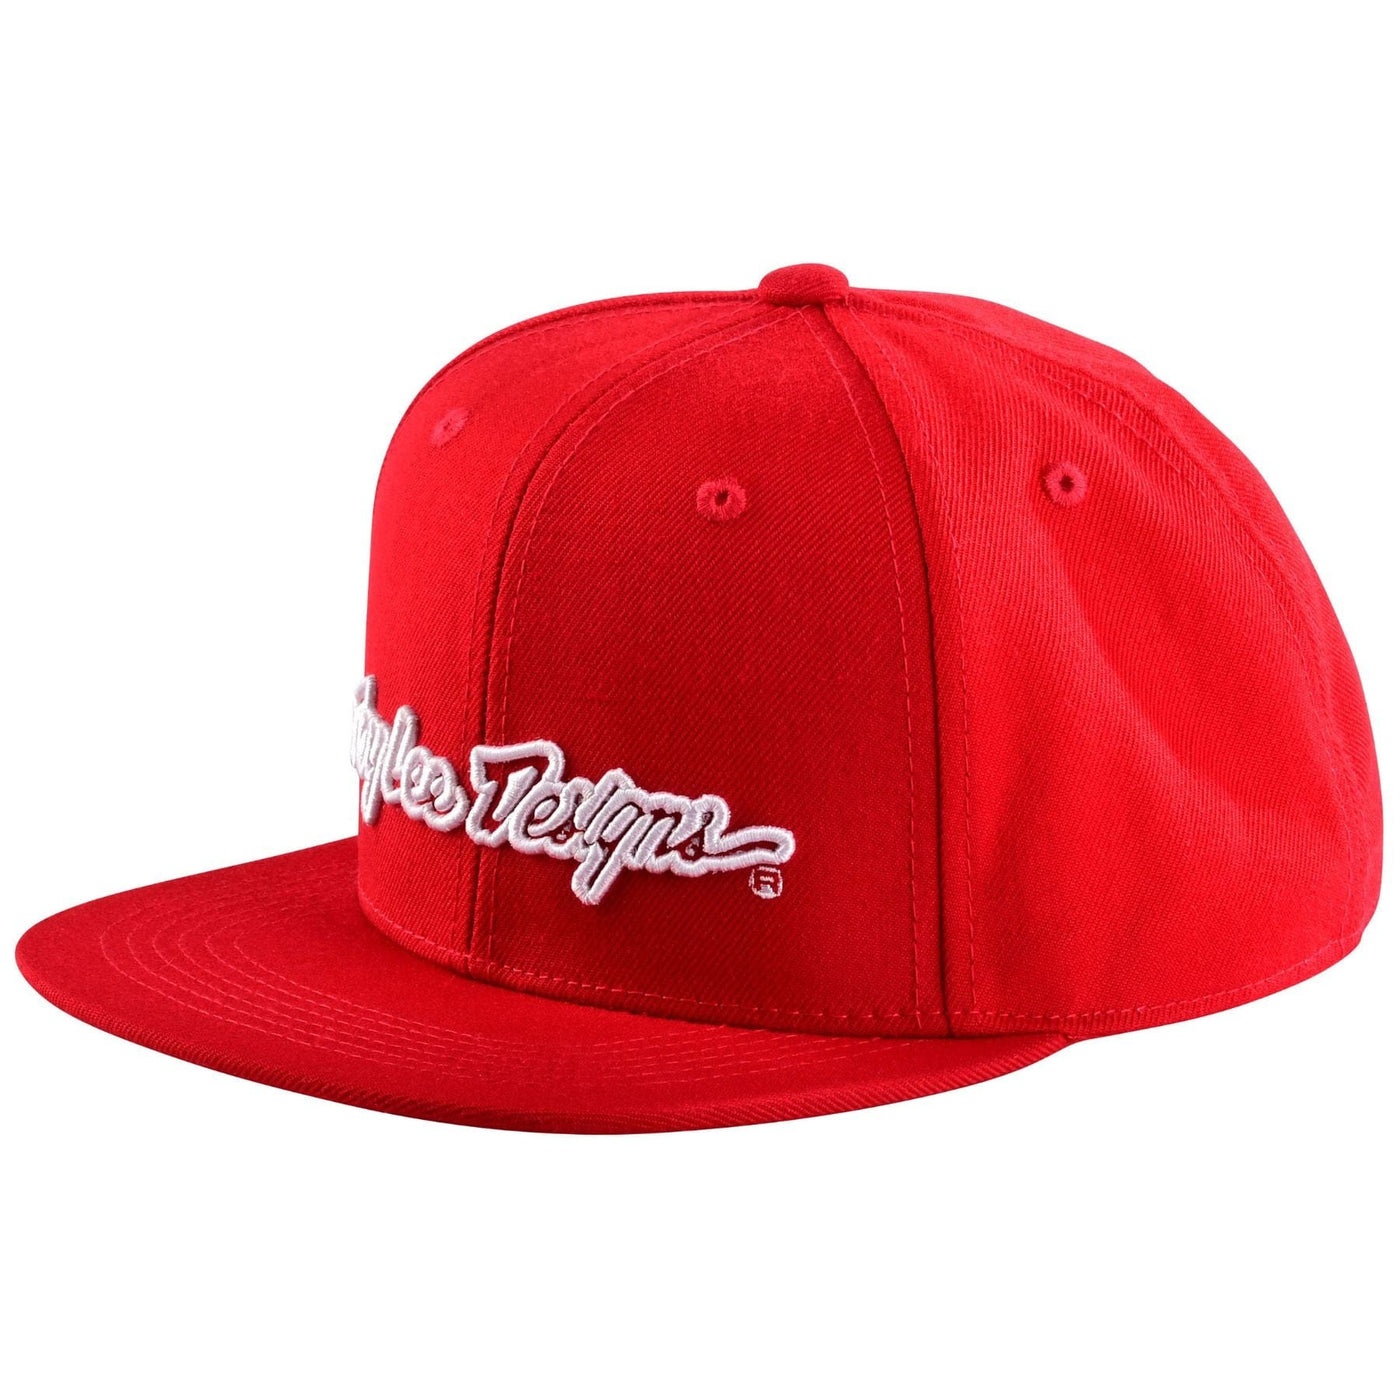 Troy Lee Designs 9FIFTY Signature Snapback Hat - Red/White